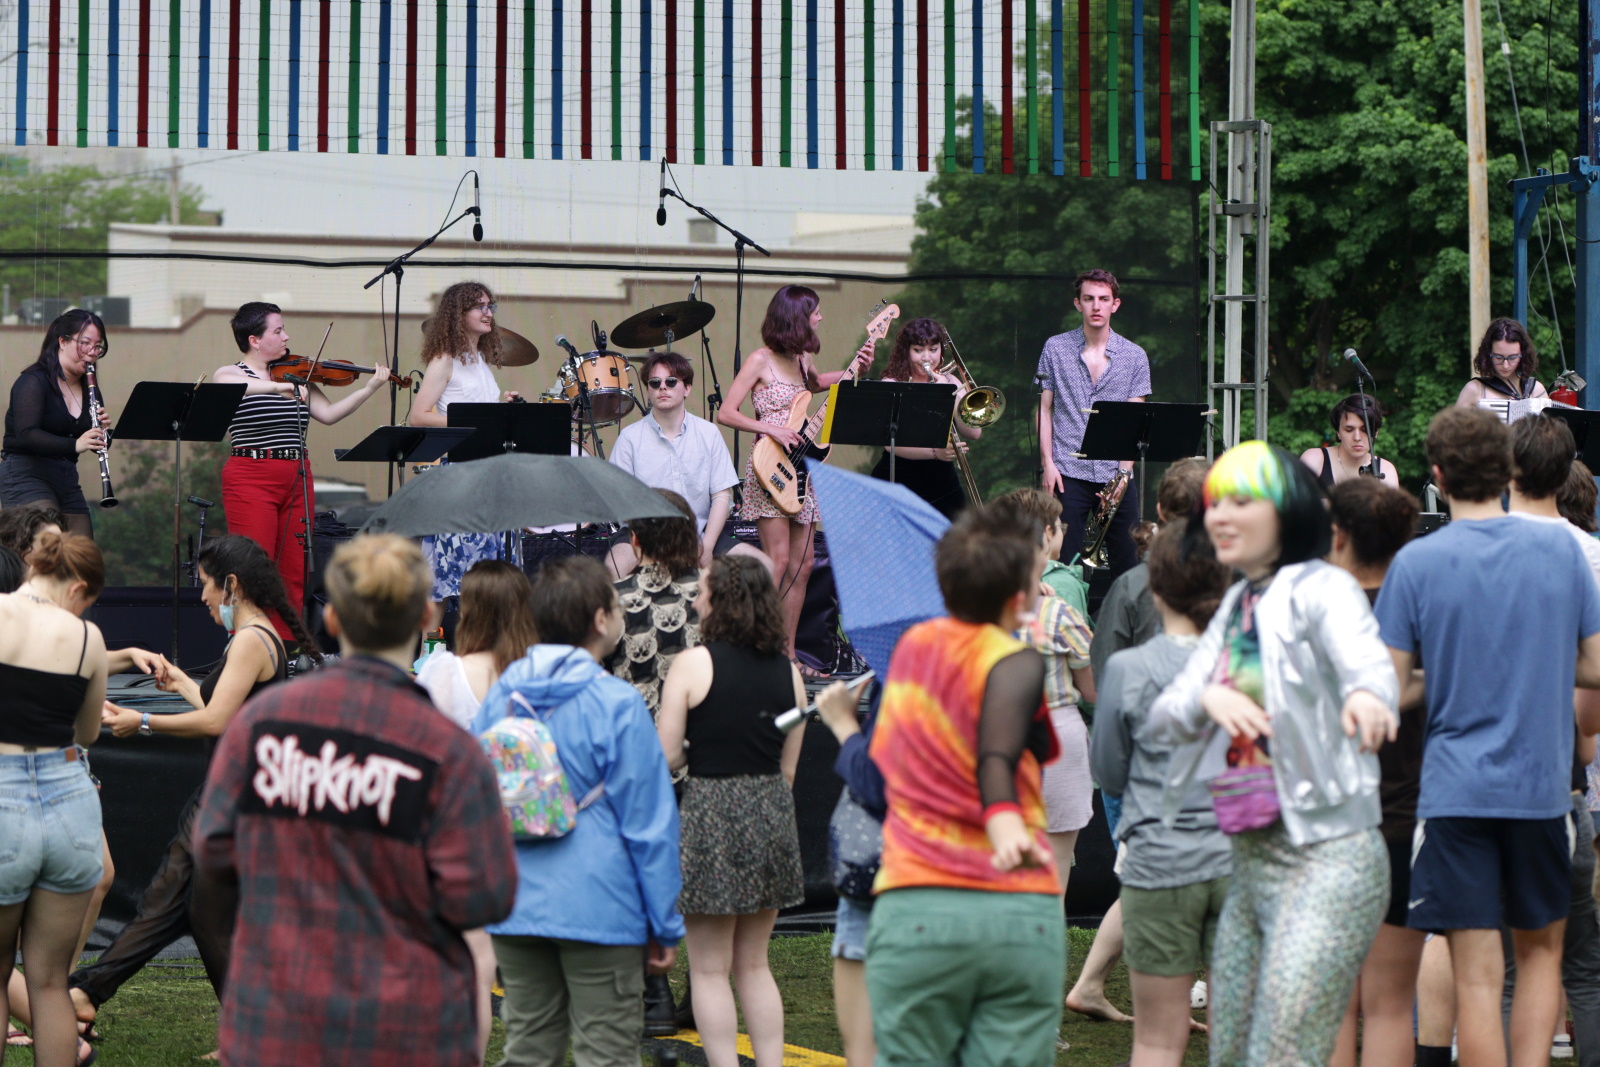 The Klezmommies perform at last year's LUaroo festival. (Photo by Danny Damiani)